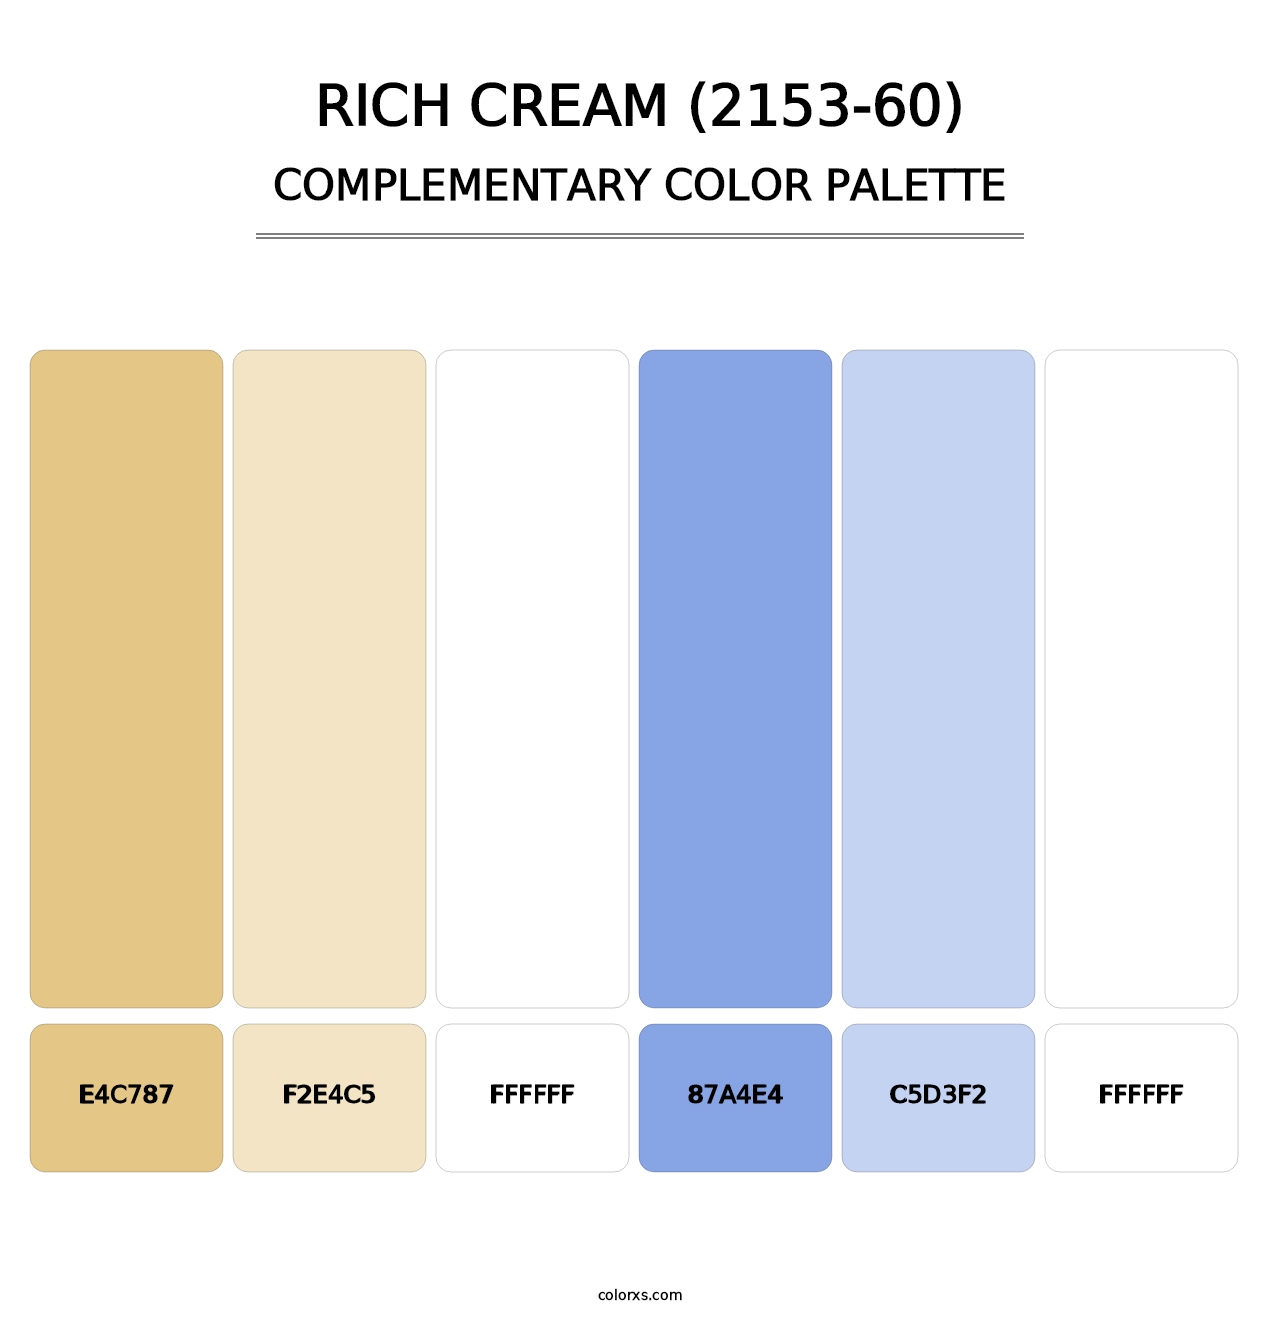 Rich Cream (2153-60) - Complementary Color Palette